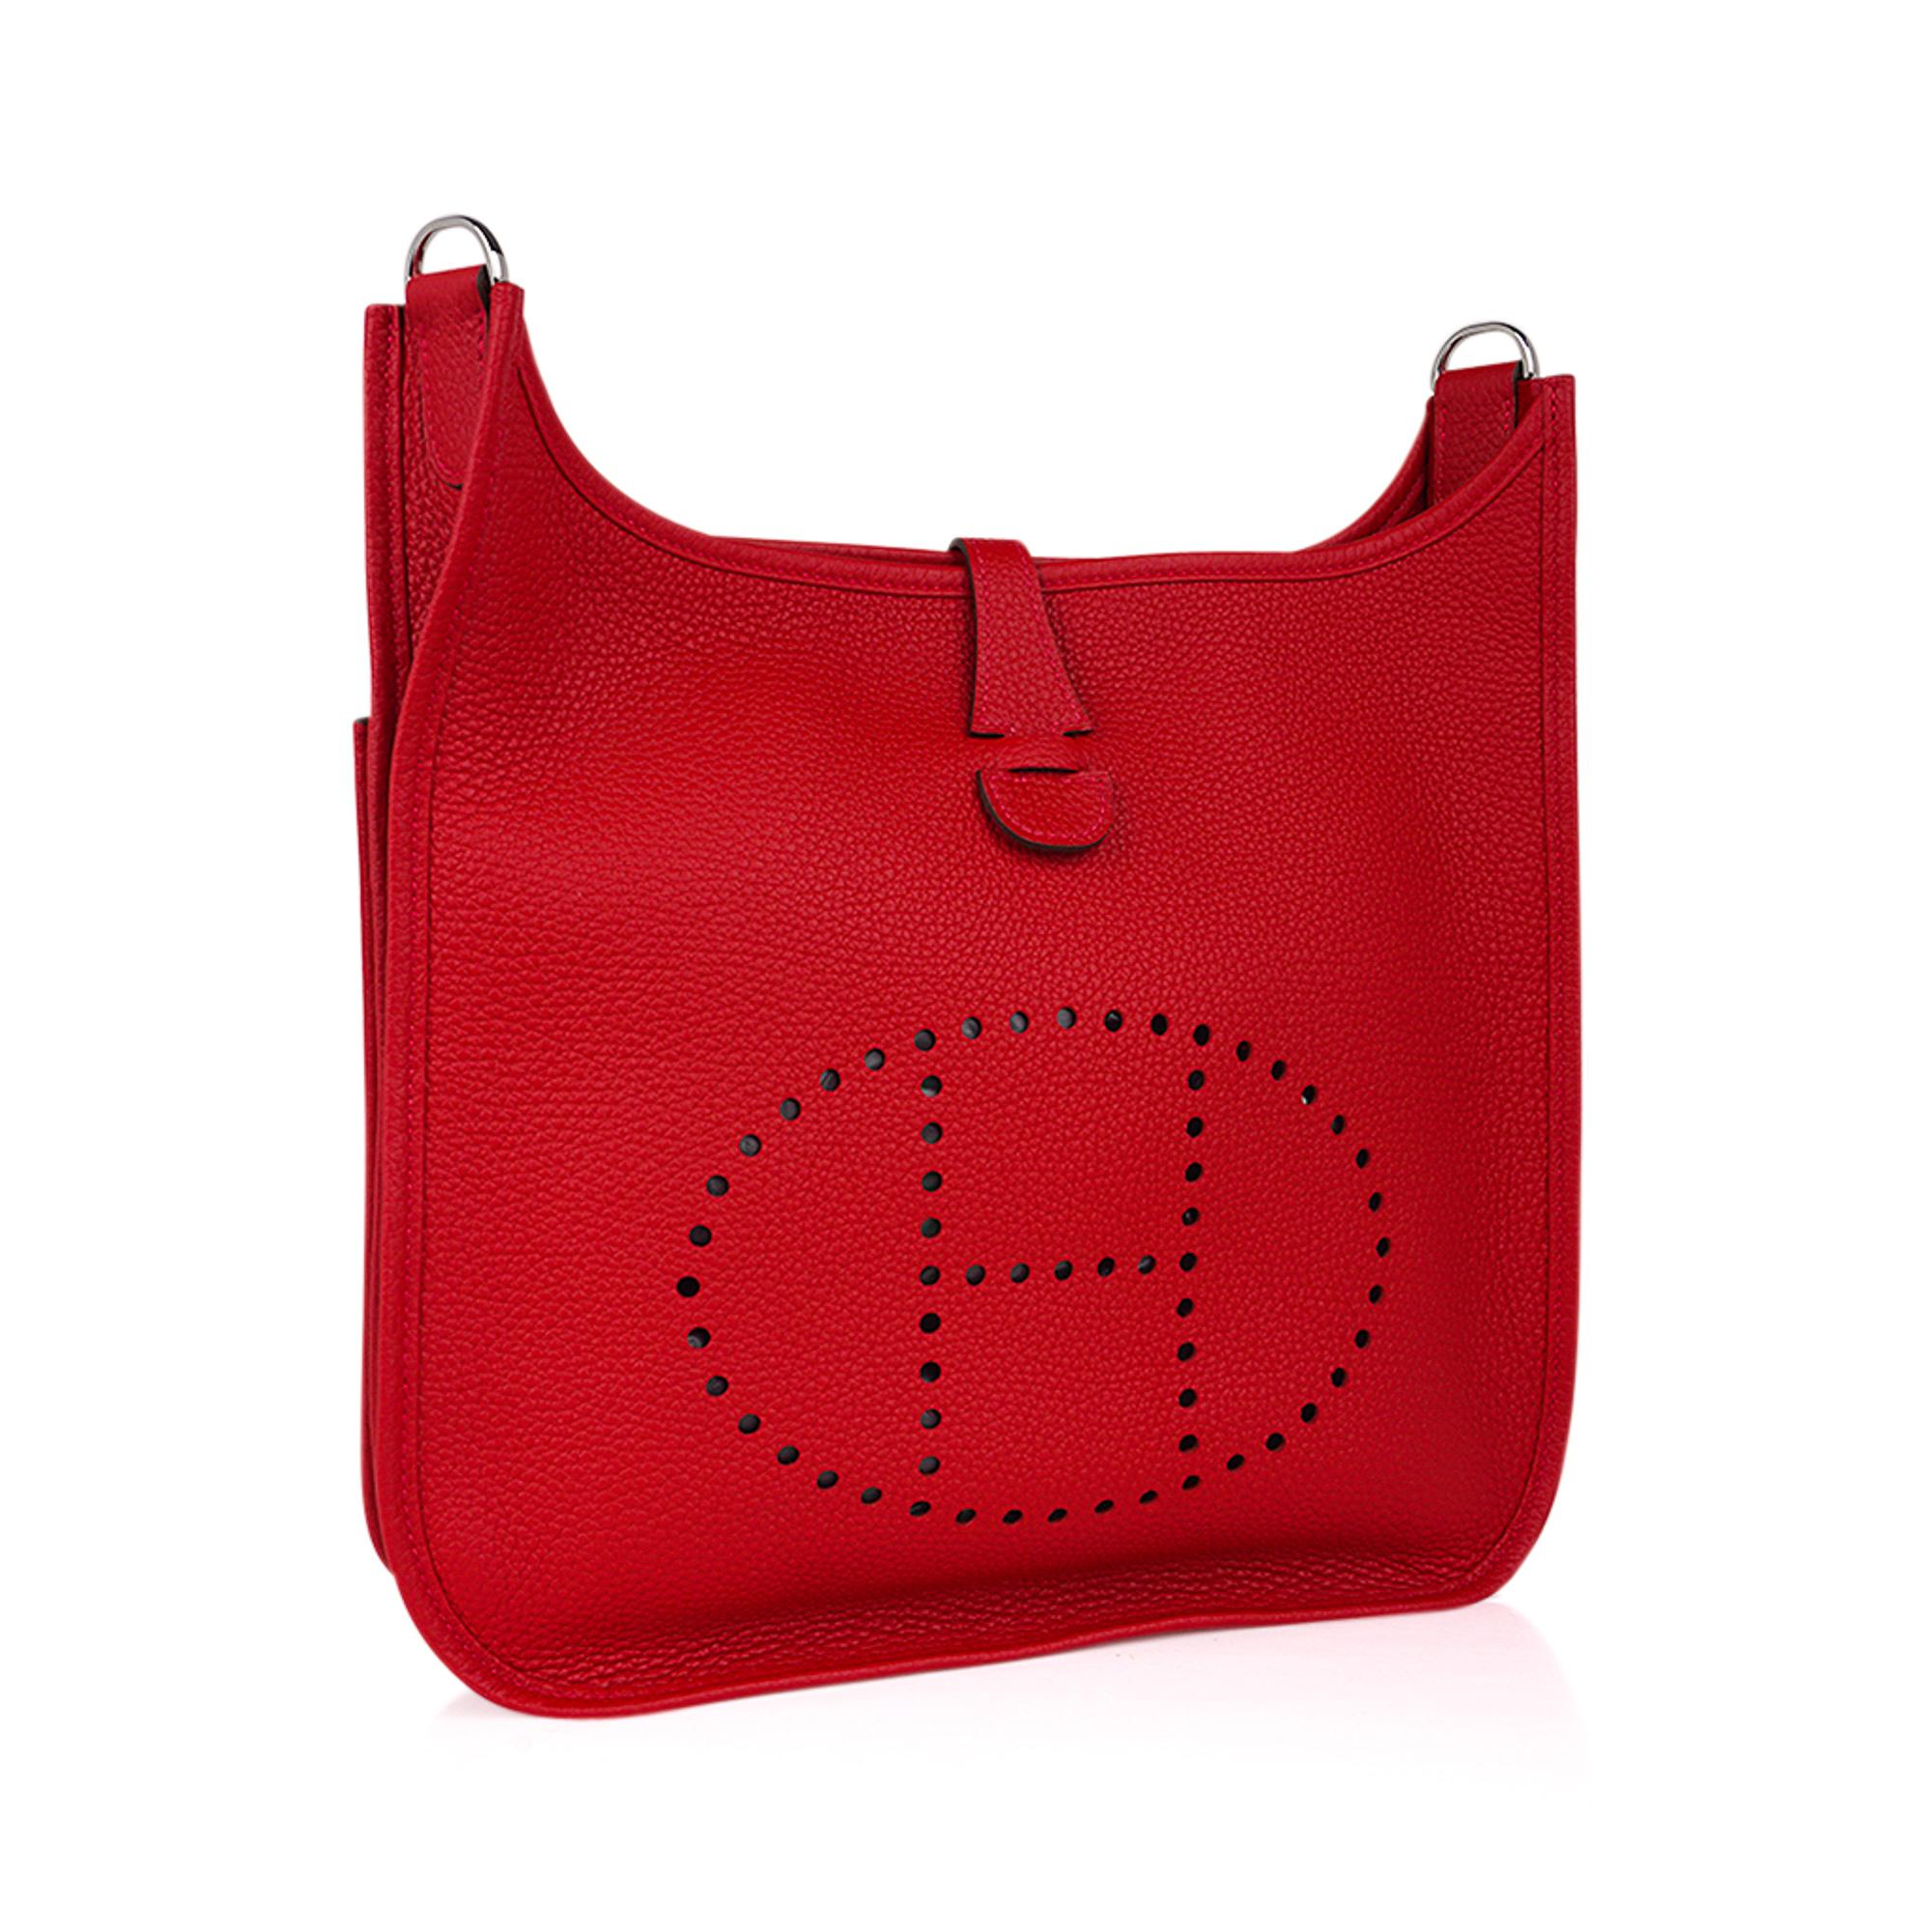 Mightychic offers an Hermes Evelyne PM featured in vivid Rouge Casaque.
Rich with palladium hardware.
Plush clemence leather.
Fabulous shoulder or cross body bag with roomy interior and rear outside deep pocket. 
Sport strap in textile with leather